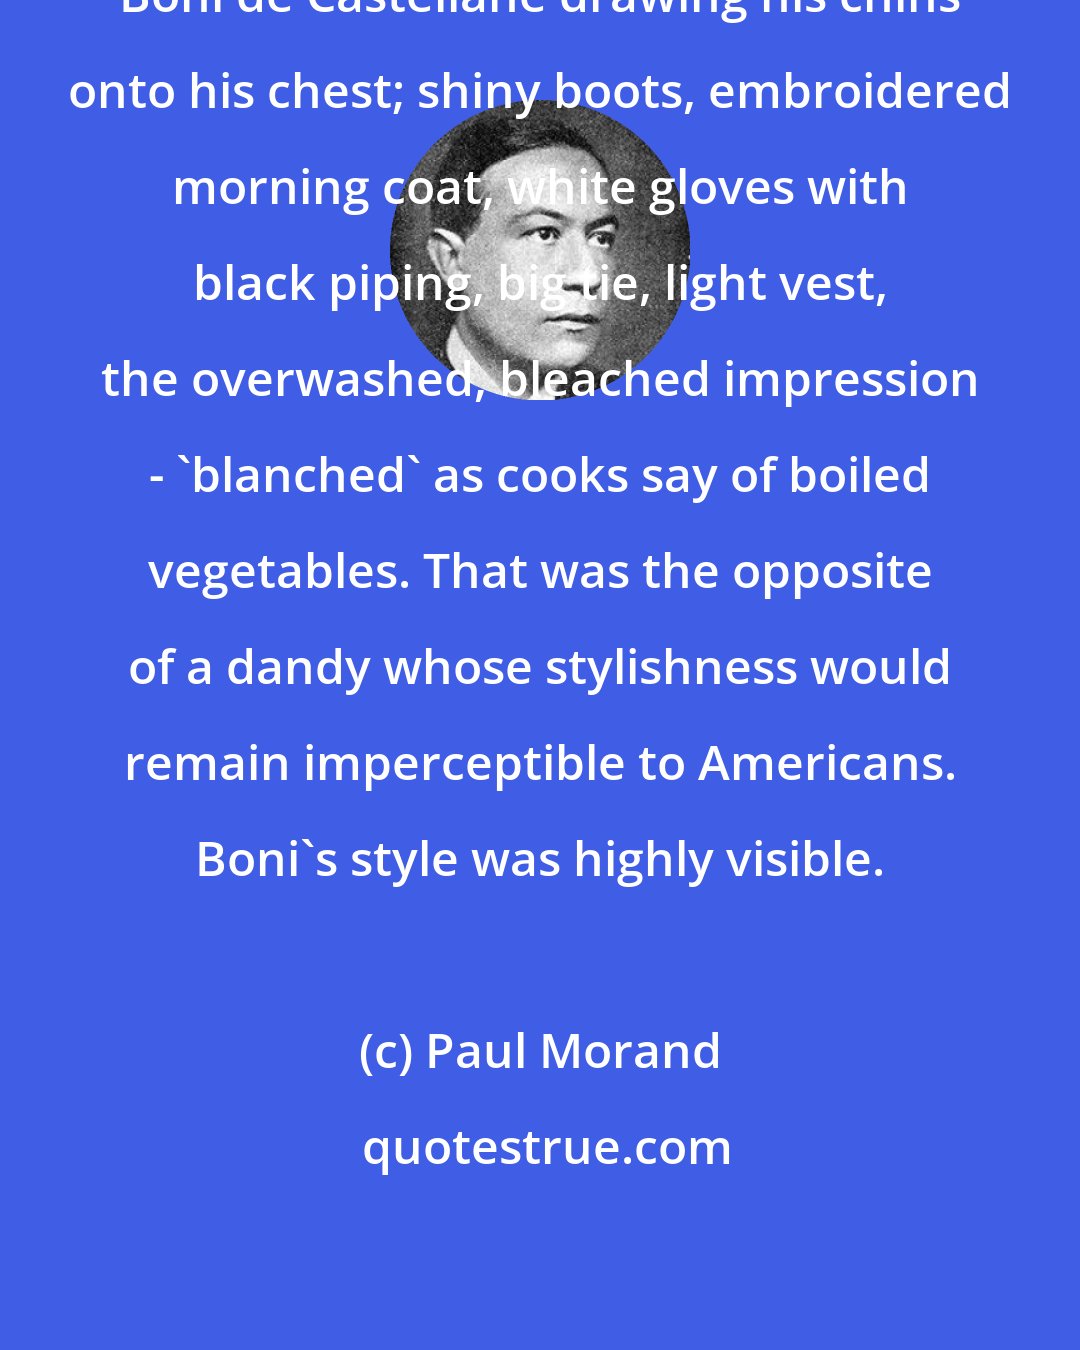 Paul Morand: Boni de Castellane drawing his chins onto his chest; shiny boots, embroidered morning coat, white gloves with black piping, big tie, light vest, the overwashed, bleached impression - 'blanched' as cooks say of boiled vegetables. That was the opposite of a dandy whose stylishness would remain imperceptible to Americans. Boni's style was highly visible.